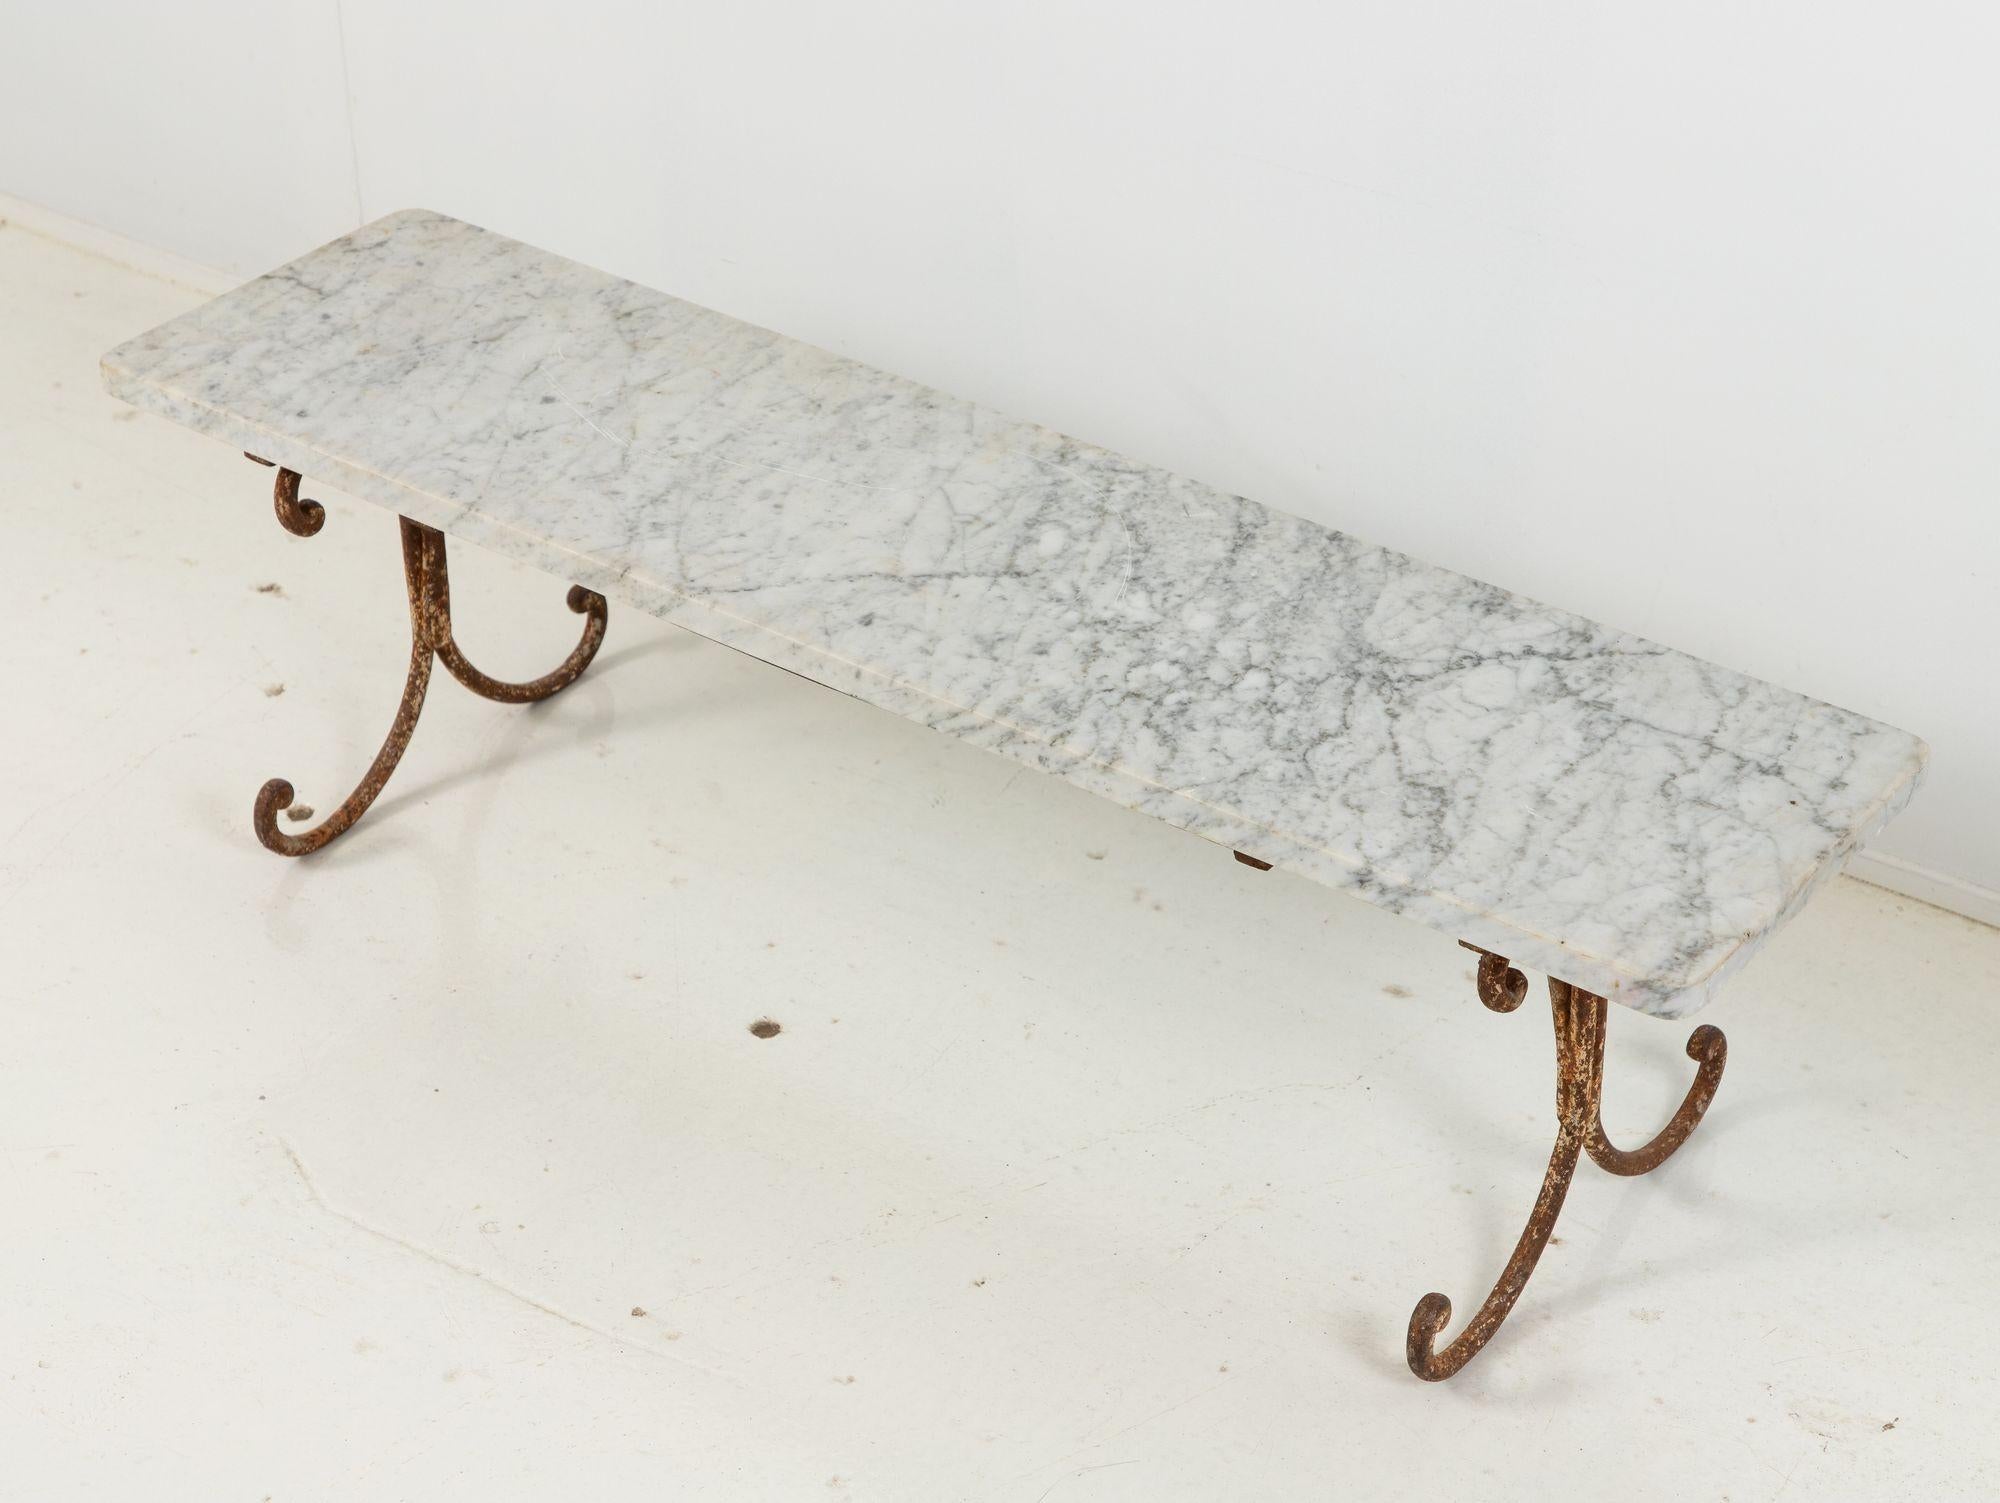 Transport yourself to the enchanting world of 1940s French elegance with this exquisite marble dessert stand. Its opulent allure is matched by the delicately crafted iron scroll legs, forming a harmonious fusion of materials and eras. This